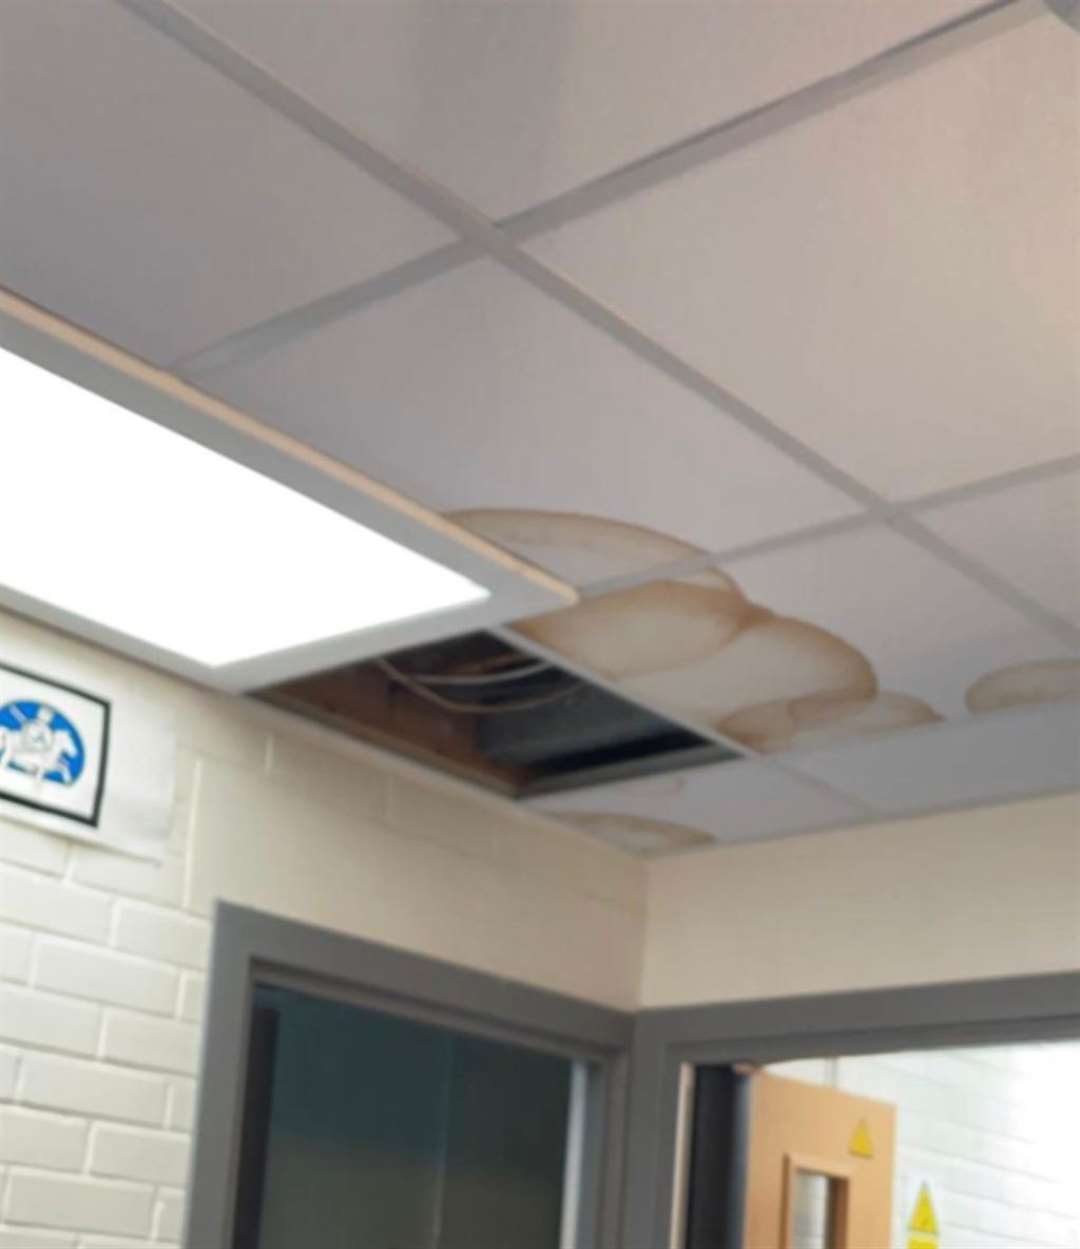 What appears to be water damage in the ceiling.